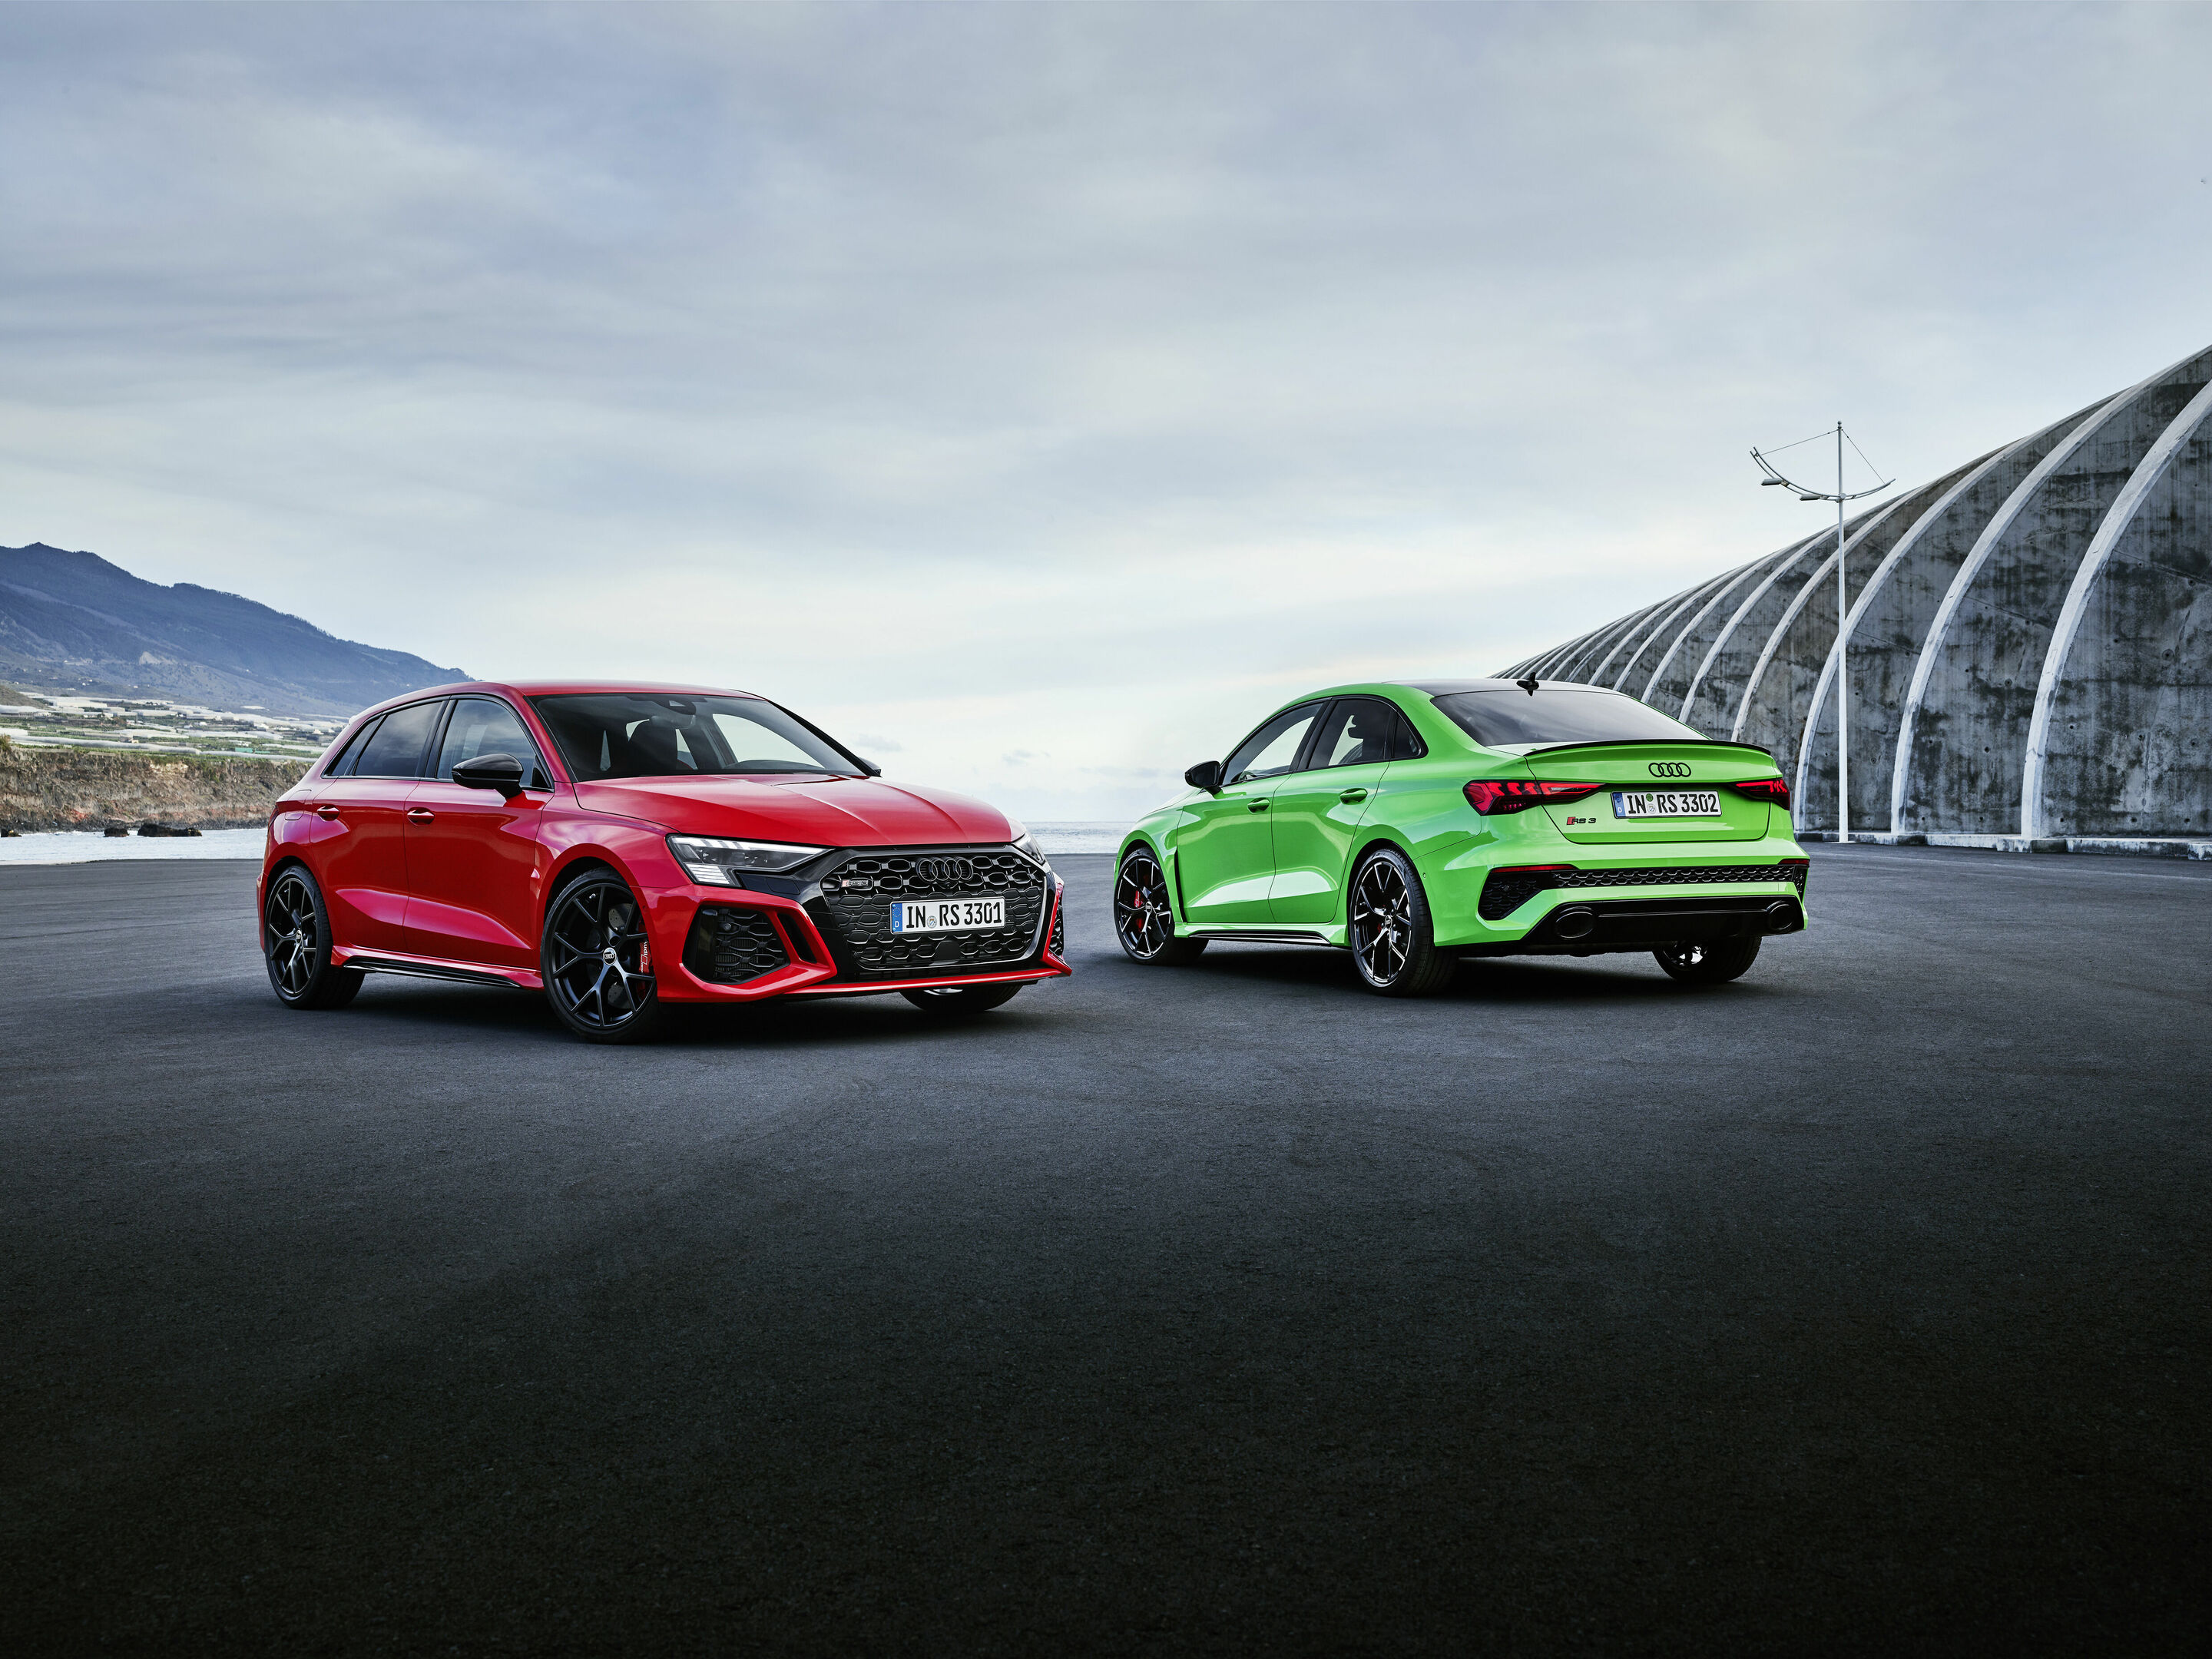 The new Audi RS 3: unmatched sportiness suitable for everyday use